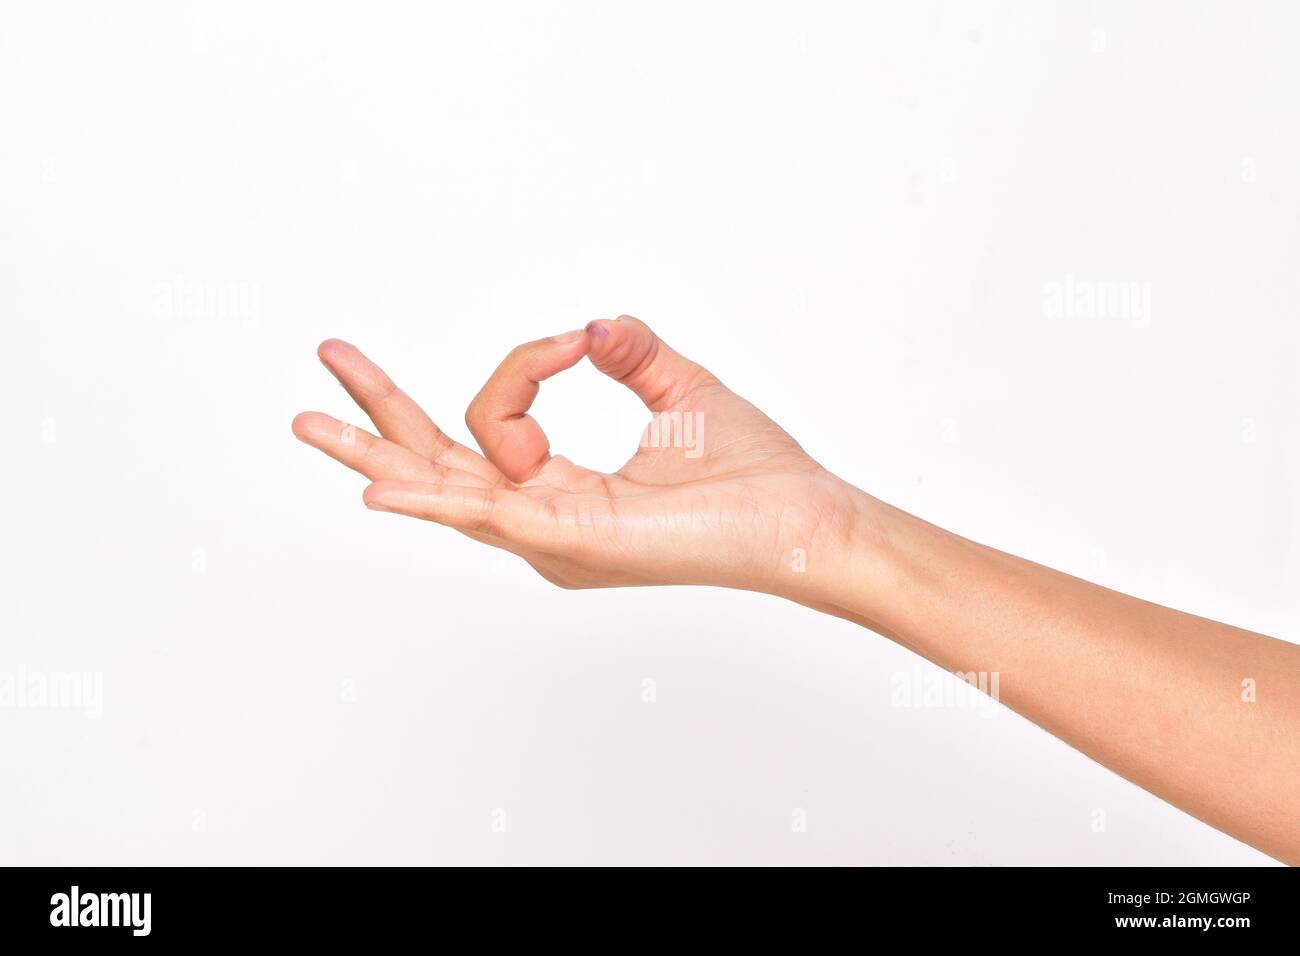 Gyan Mudra Isolated on White Background with Clipping Path Stock Photo